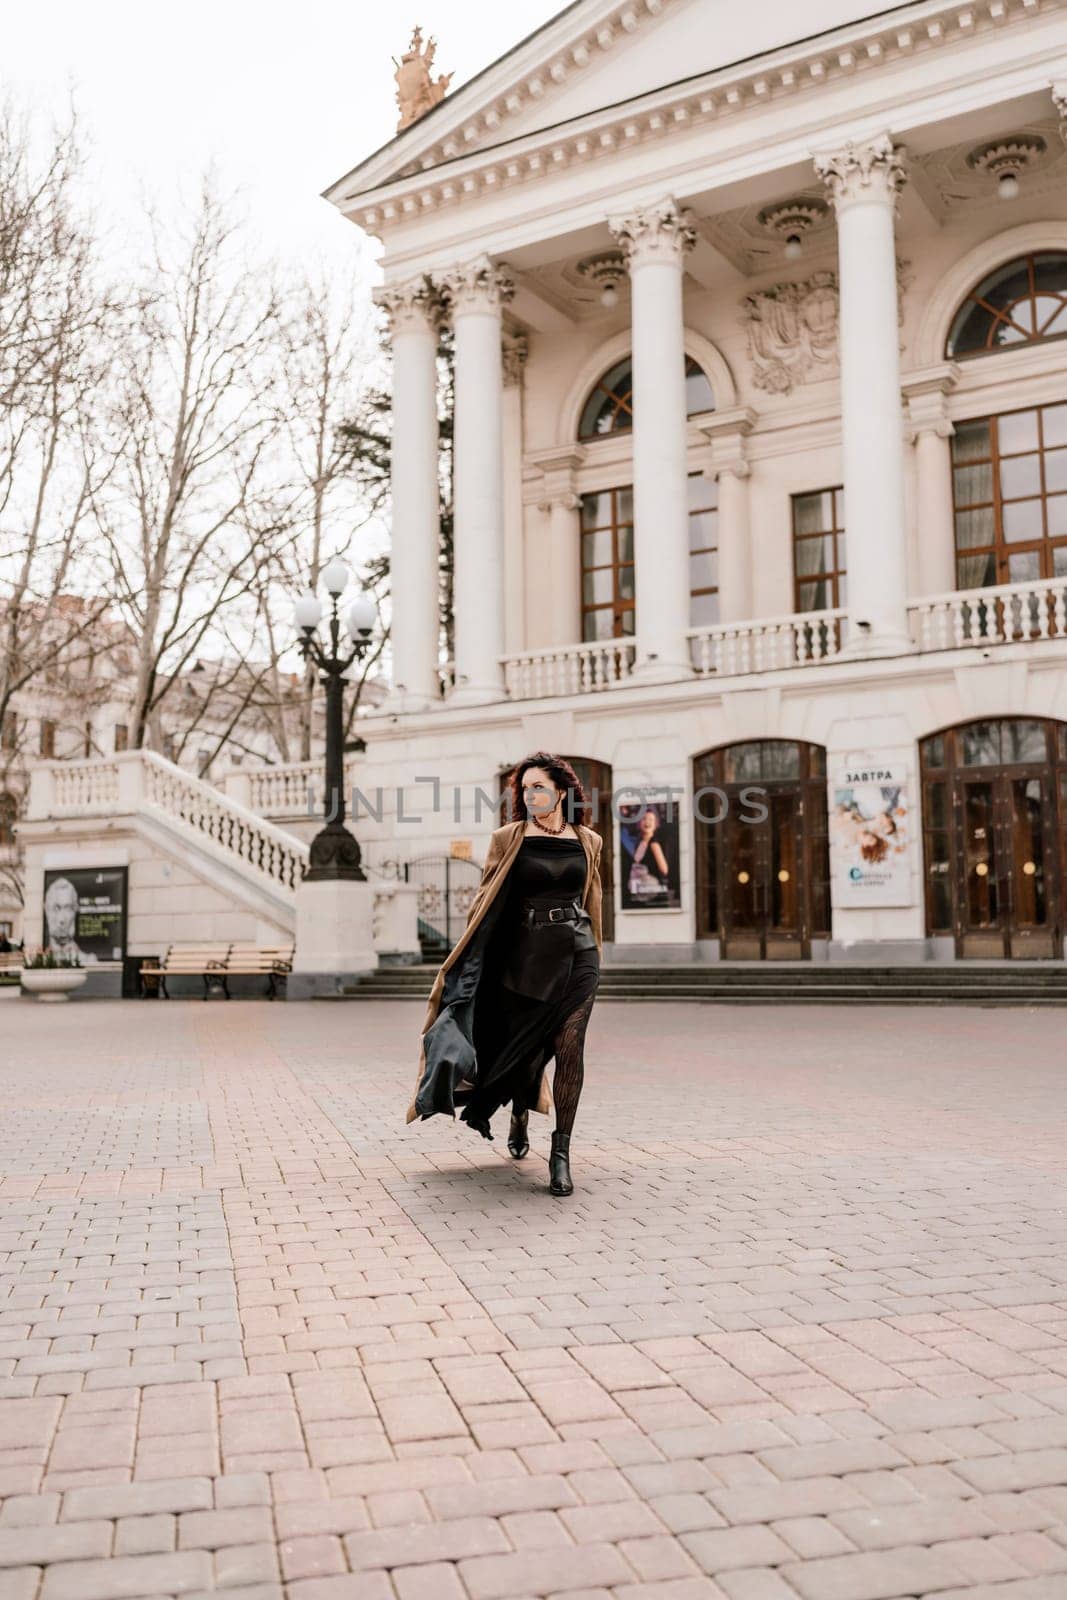 Woman street lifestyle. Image of stylish woman walking through European city on sunny day. Pretty woman with dark flowing hair, dressed in a beige raincoat and black, walks along the building